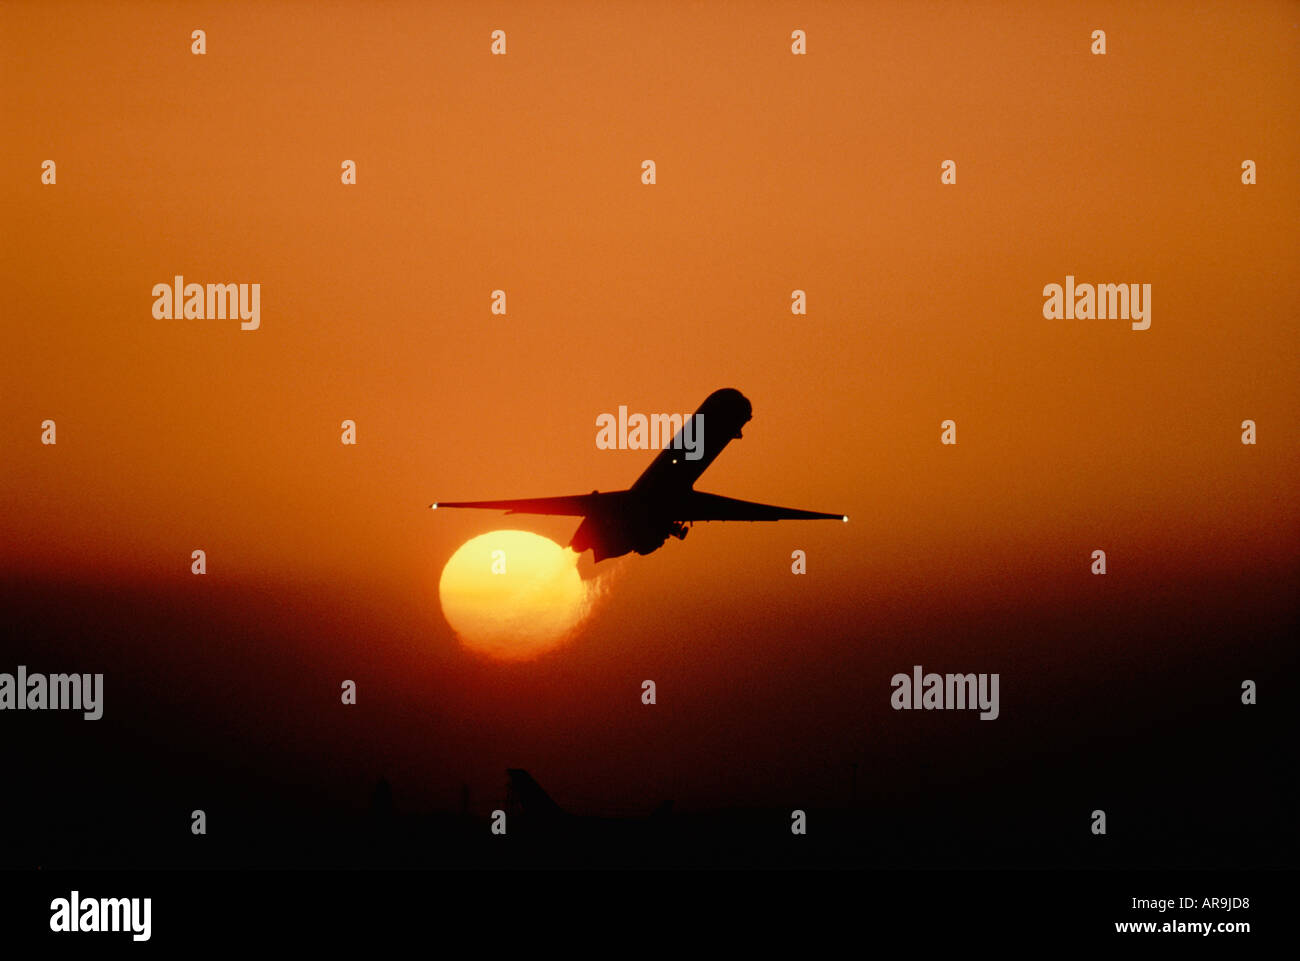 airliner jet in the air take off golden orange sky at sunset dusk showing jet thrust exhaust Stock Photo